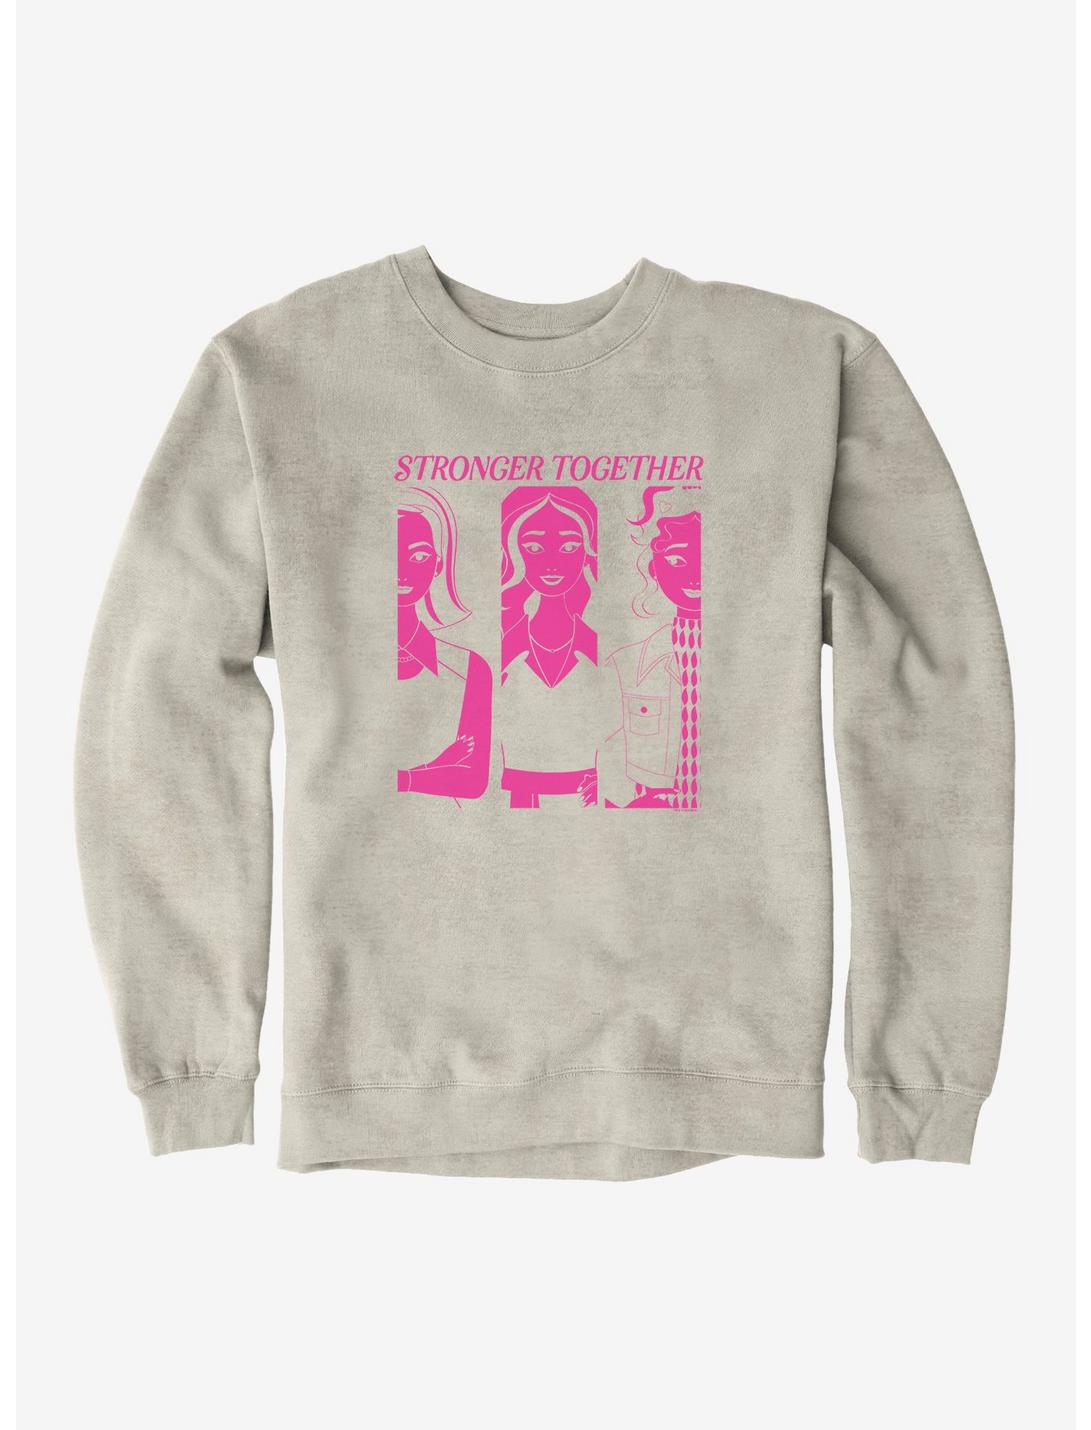 Plus Size Legally Blonde Stronger Together Sweatshirt, OATMEAL HEATHER, hi-res